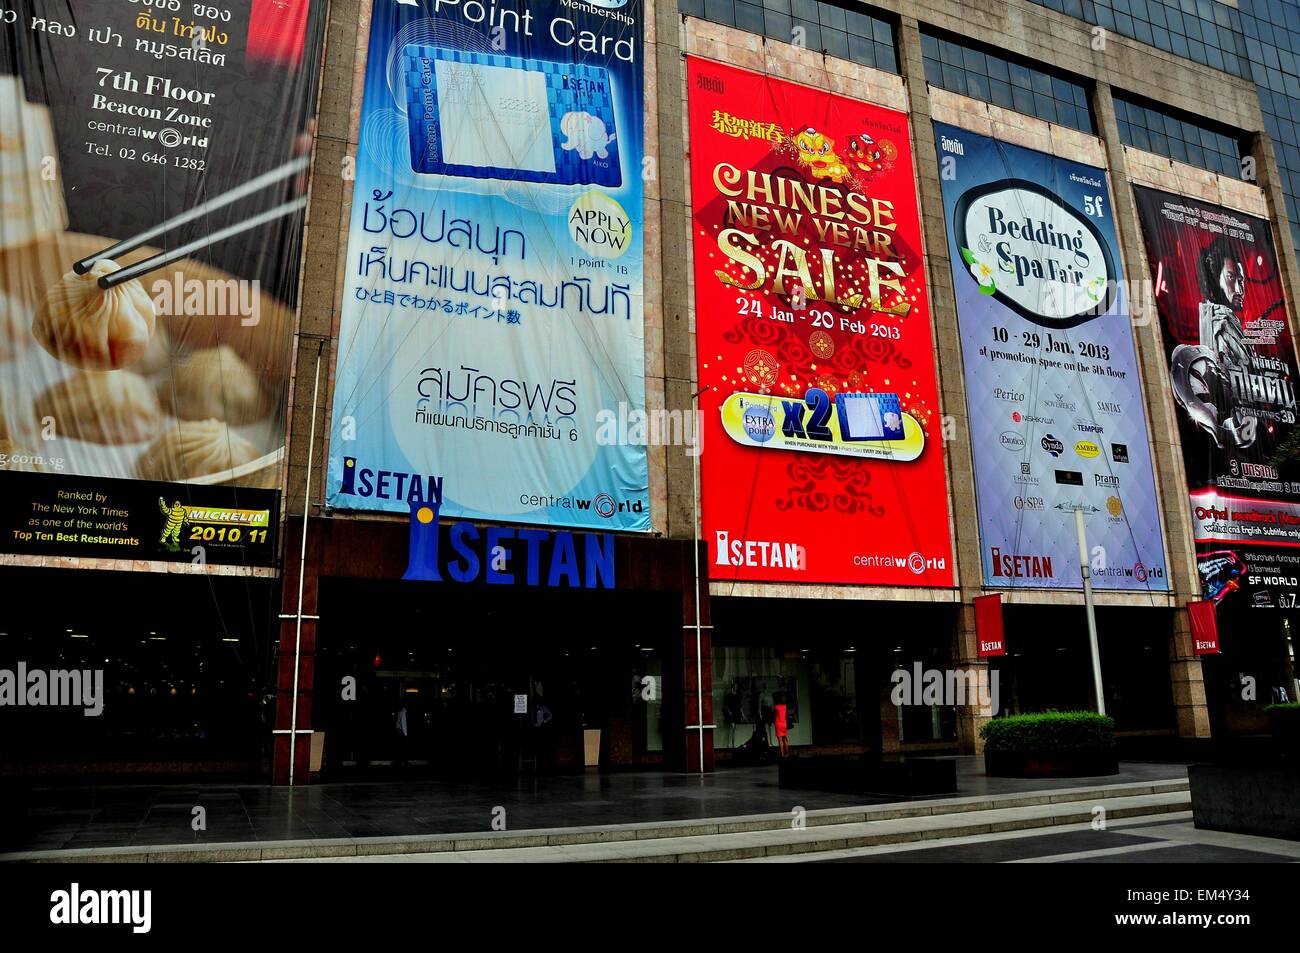 Bangkok, Thailand:  Advertising billboards promoting sales, restaurants, and films cover the entrance facade at Istetan store Stock Photo